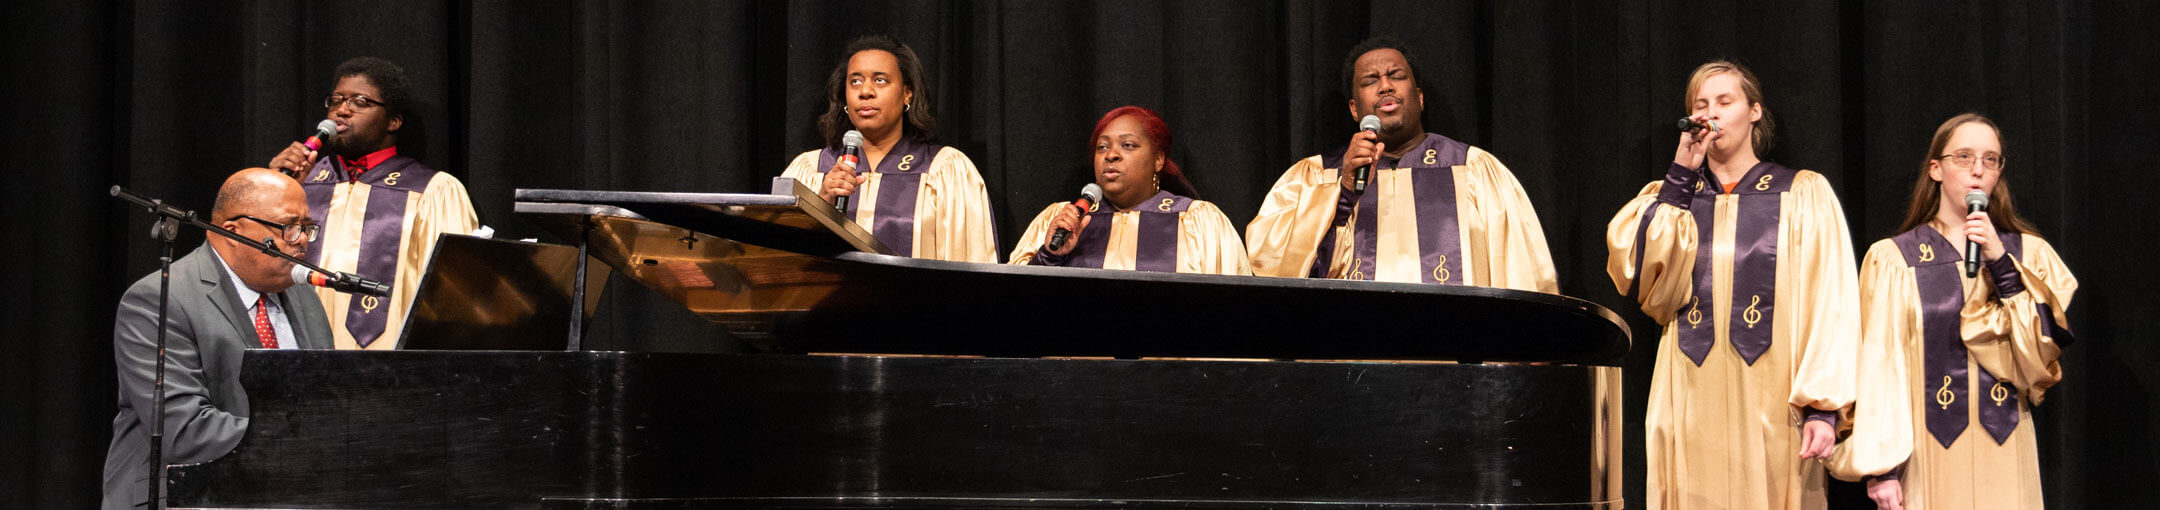 RIT's Gospel ensemble, performing on stage with Wardell Lewis playing the piano.